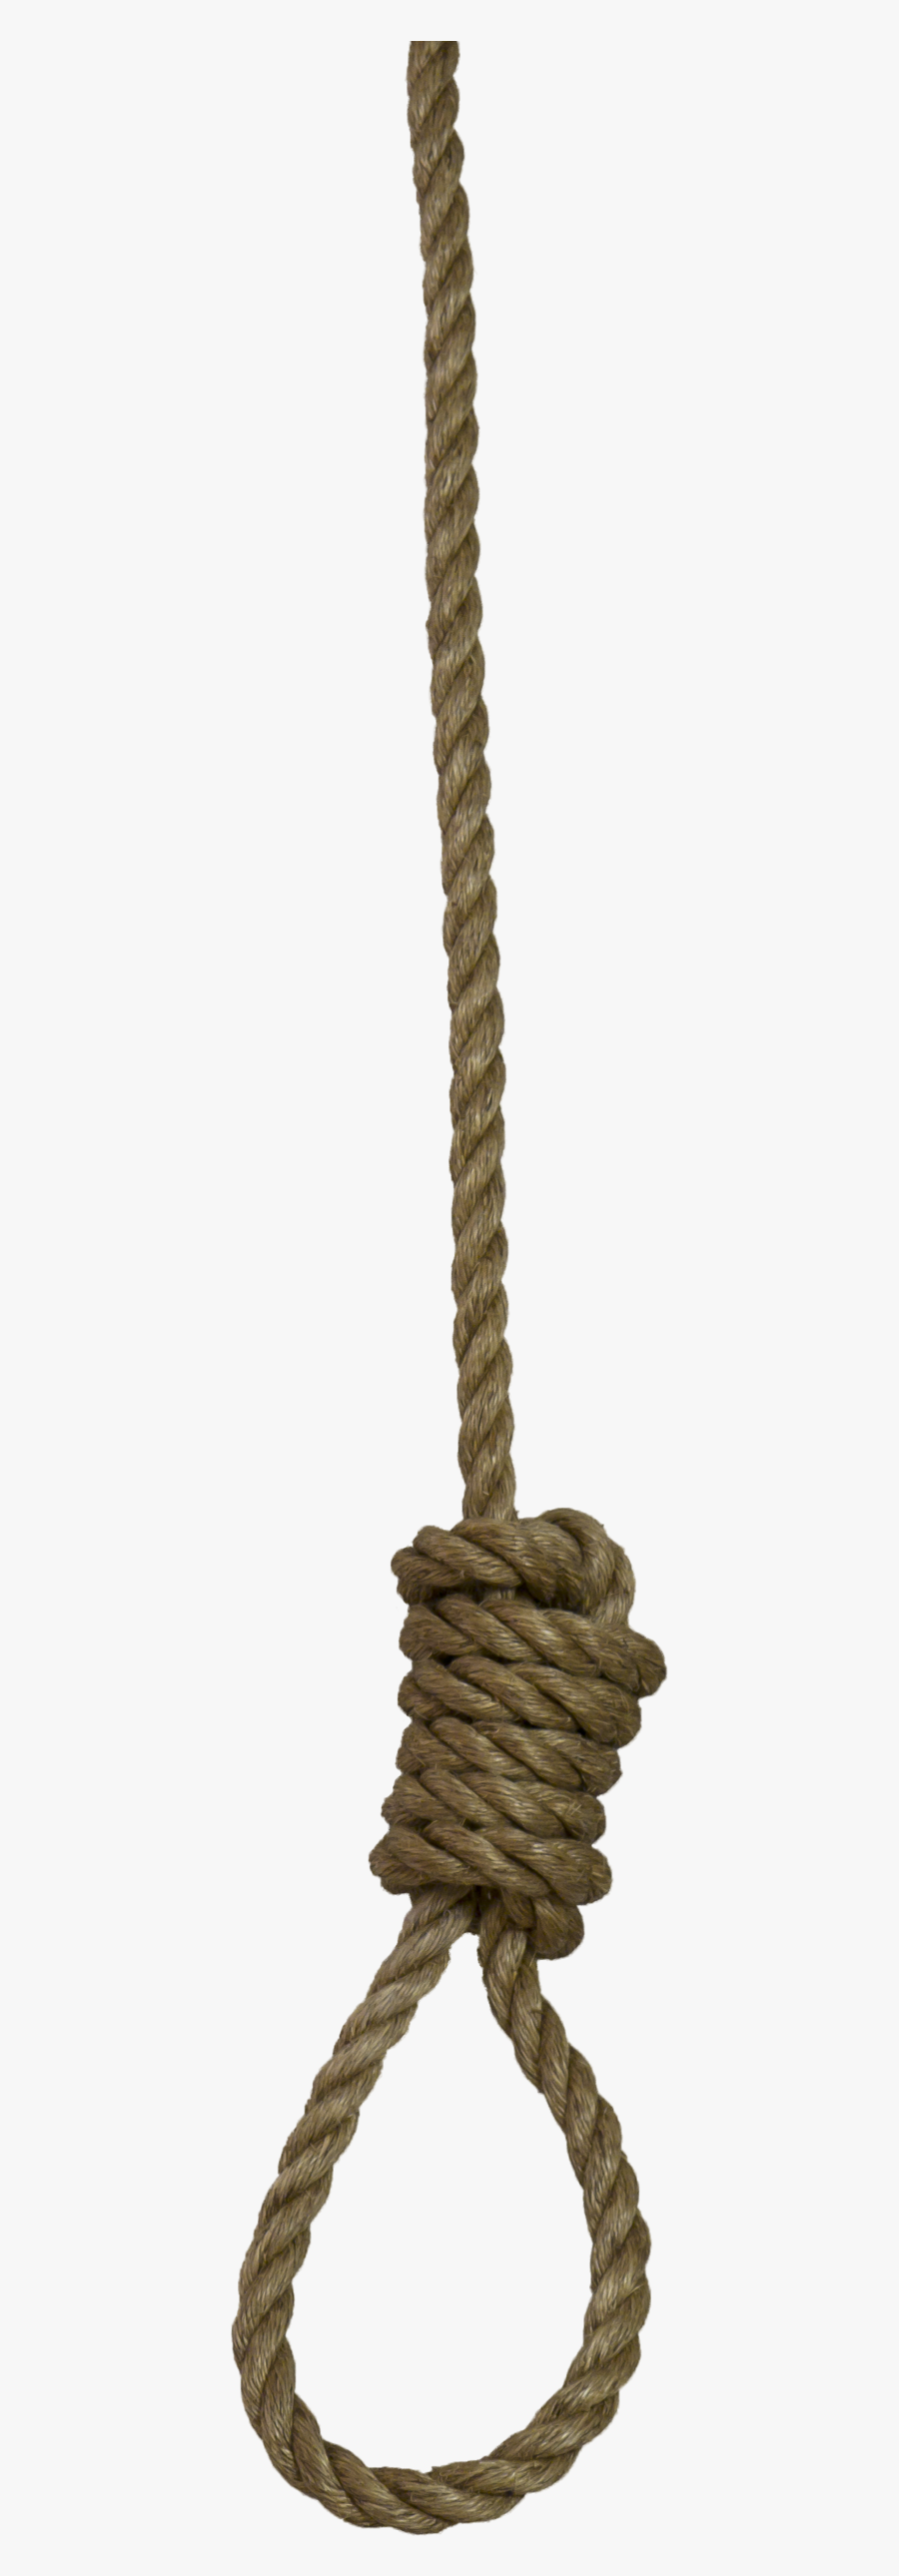 Noose Rope Knot - Hanging Rope Png, Transparent Clipart